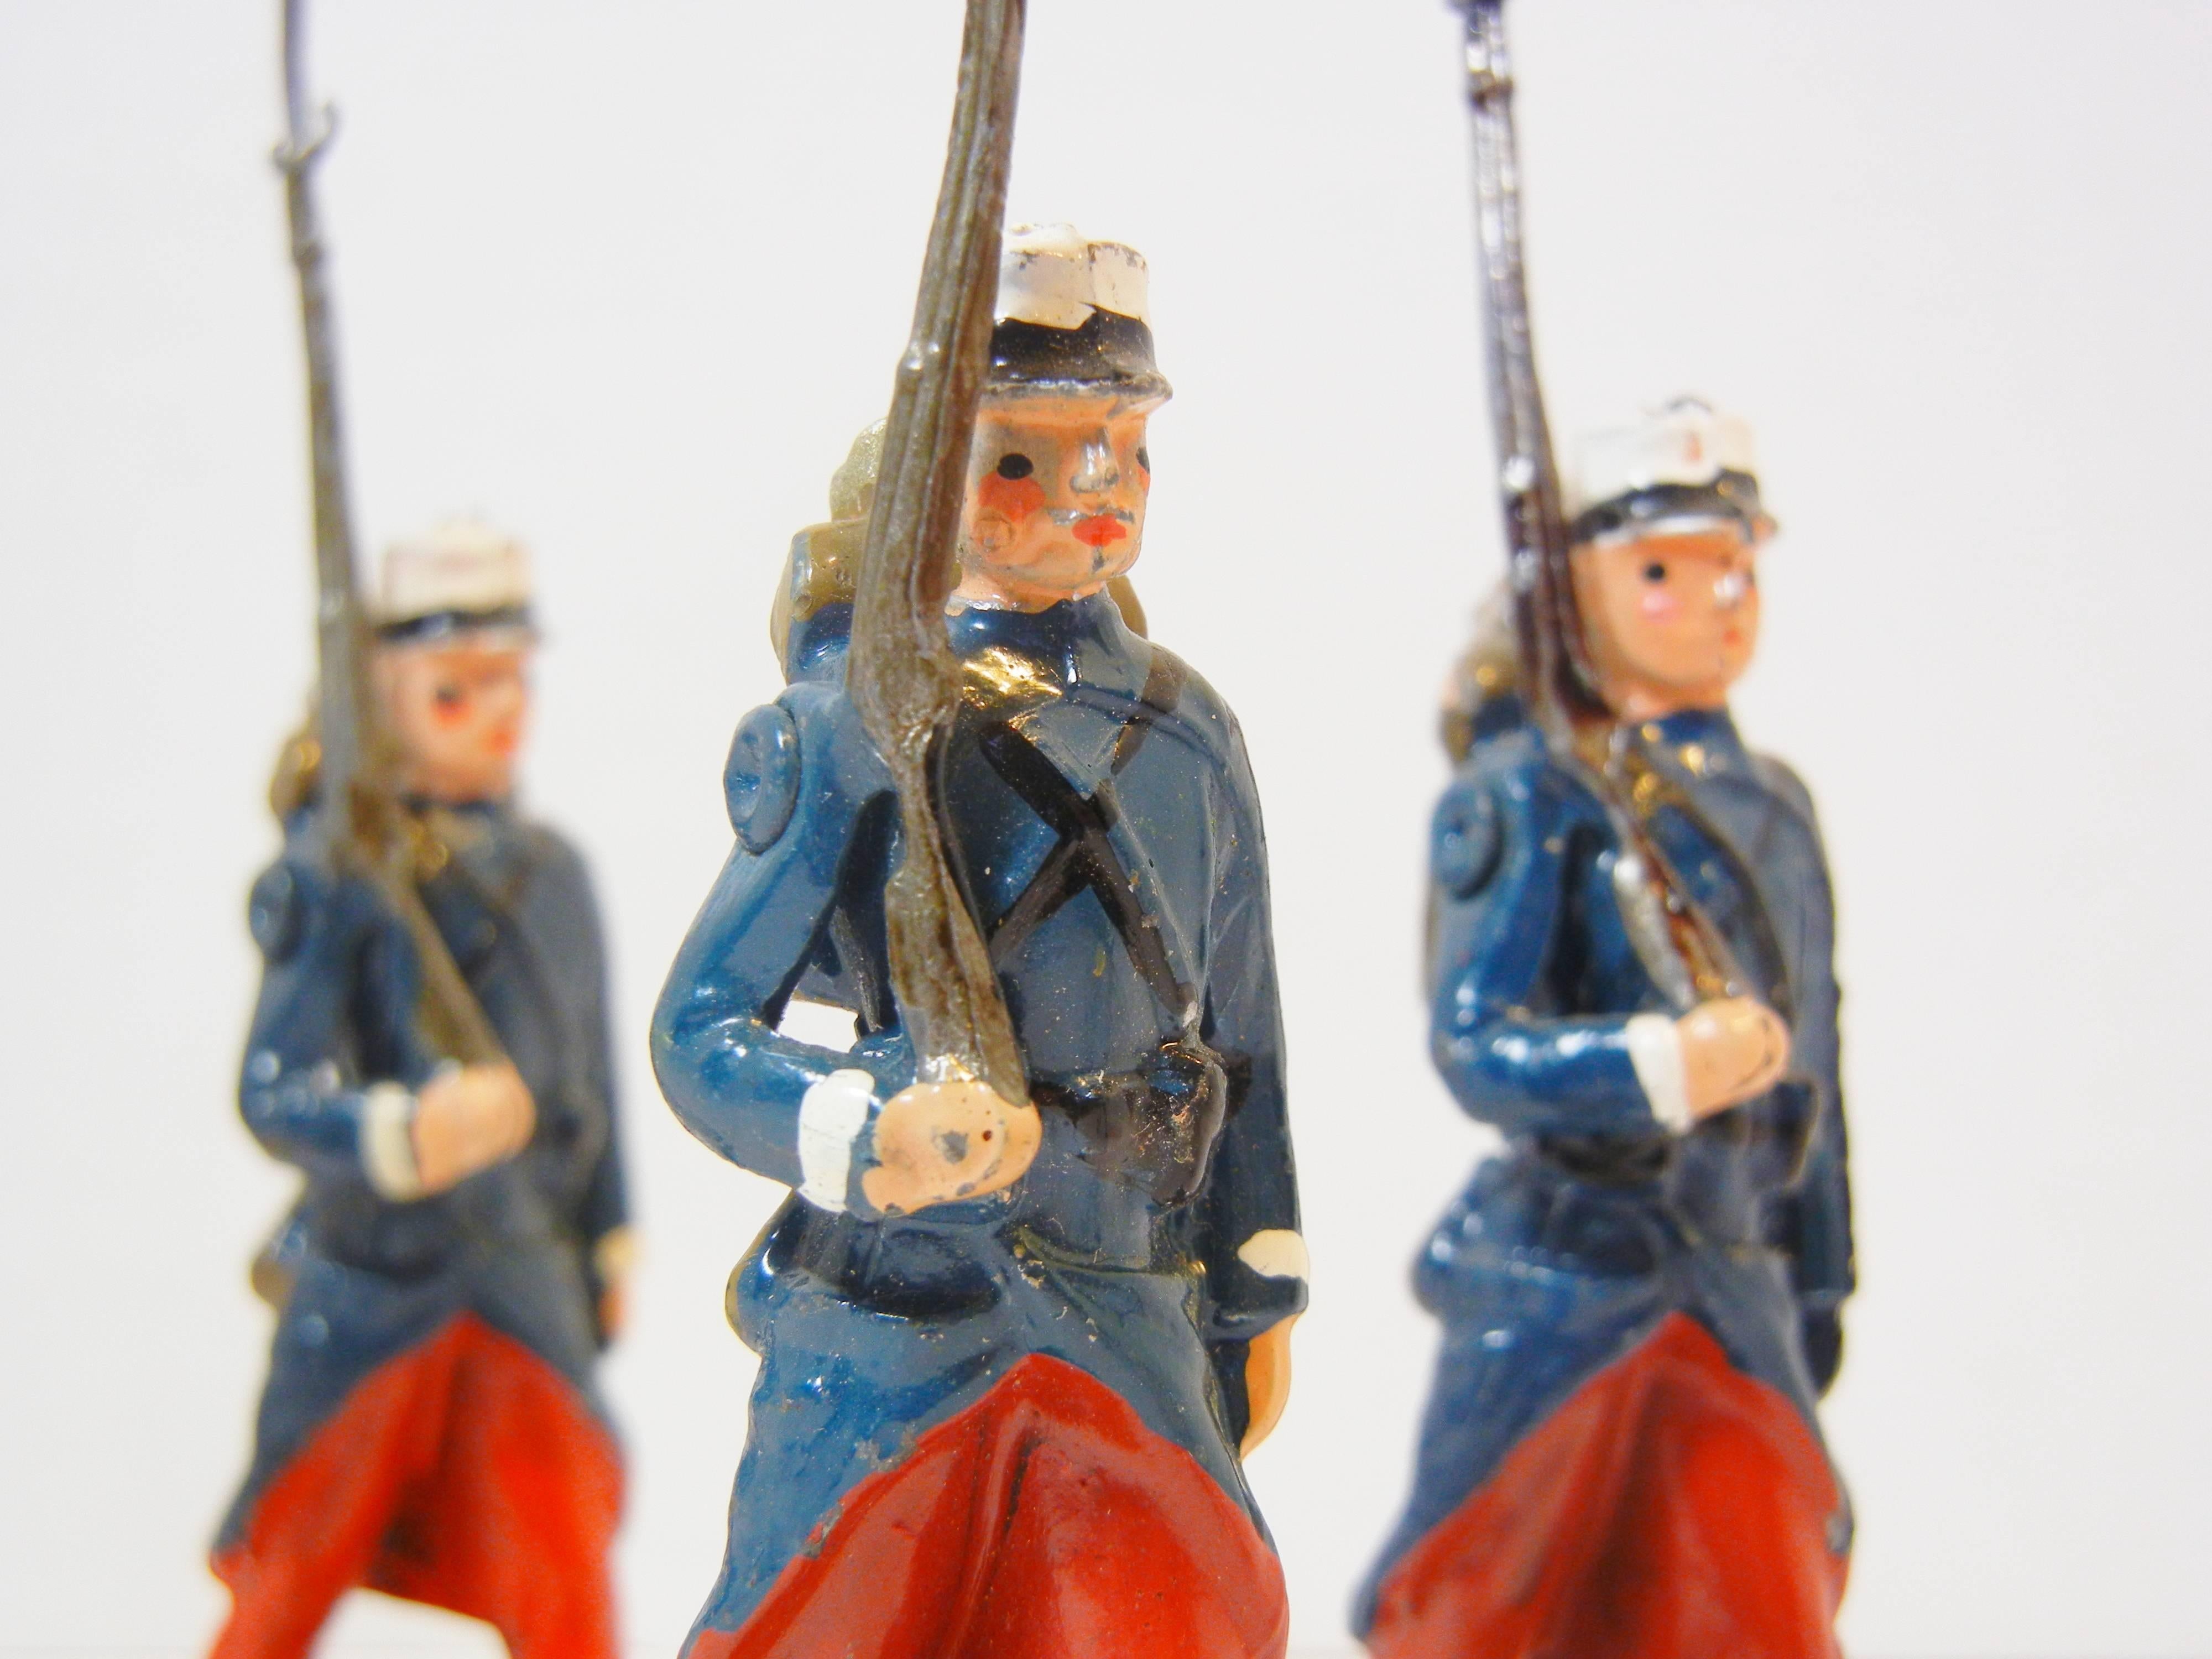 french foreign legion toy soldiers